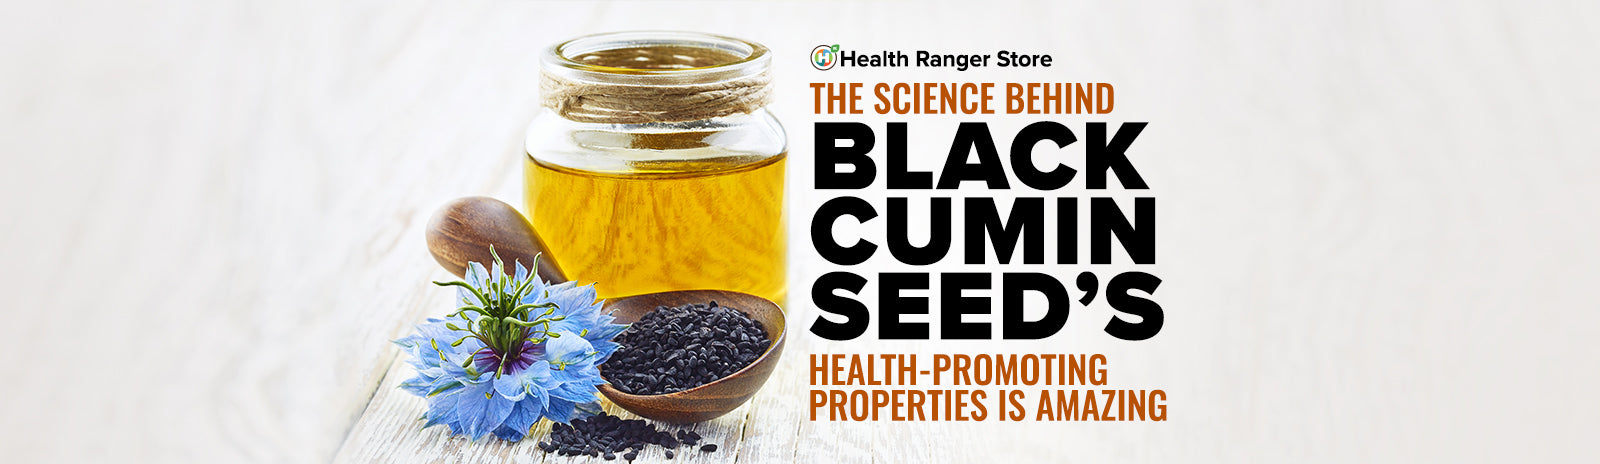 Here's the amazing science behind black cumin seed's potent health-promoting properties